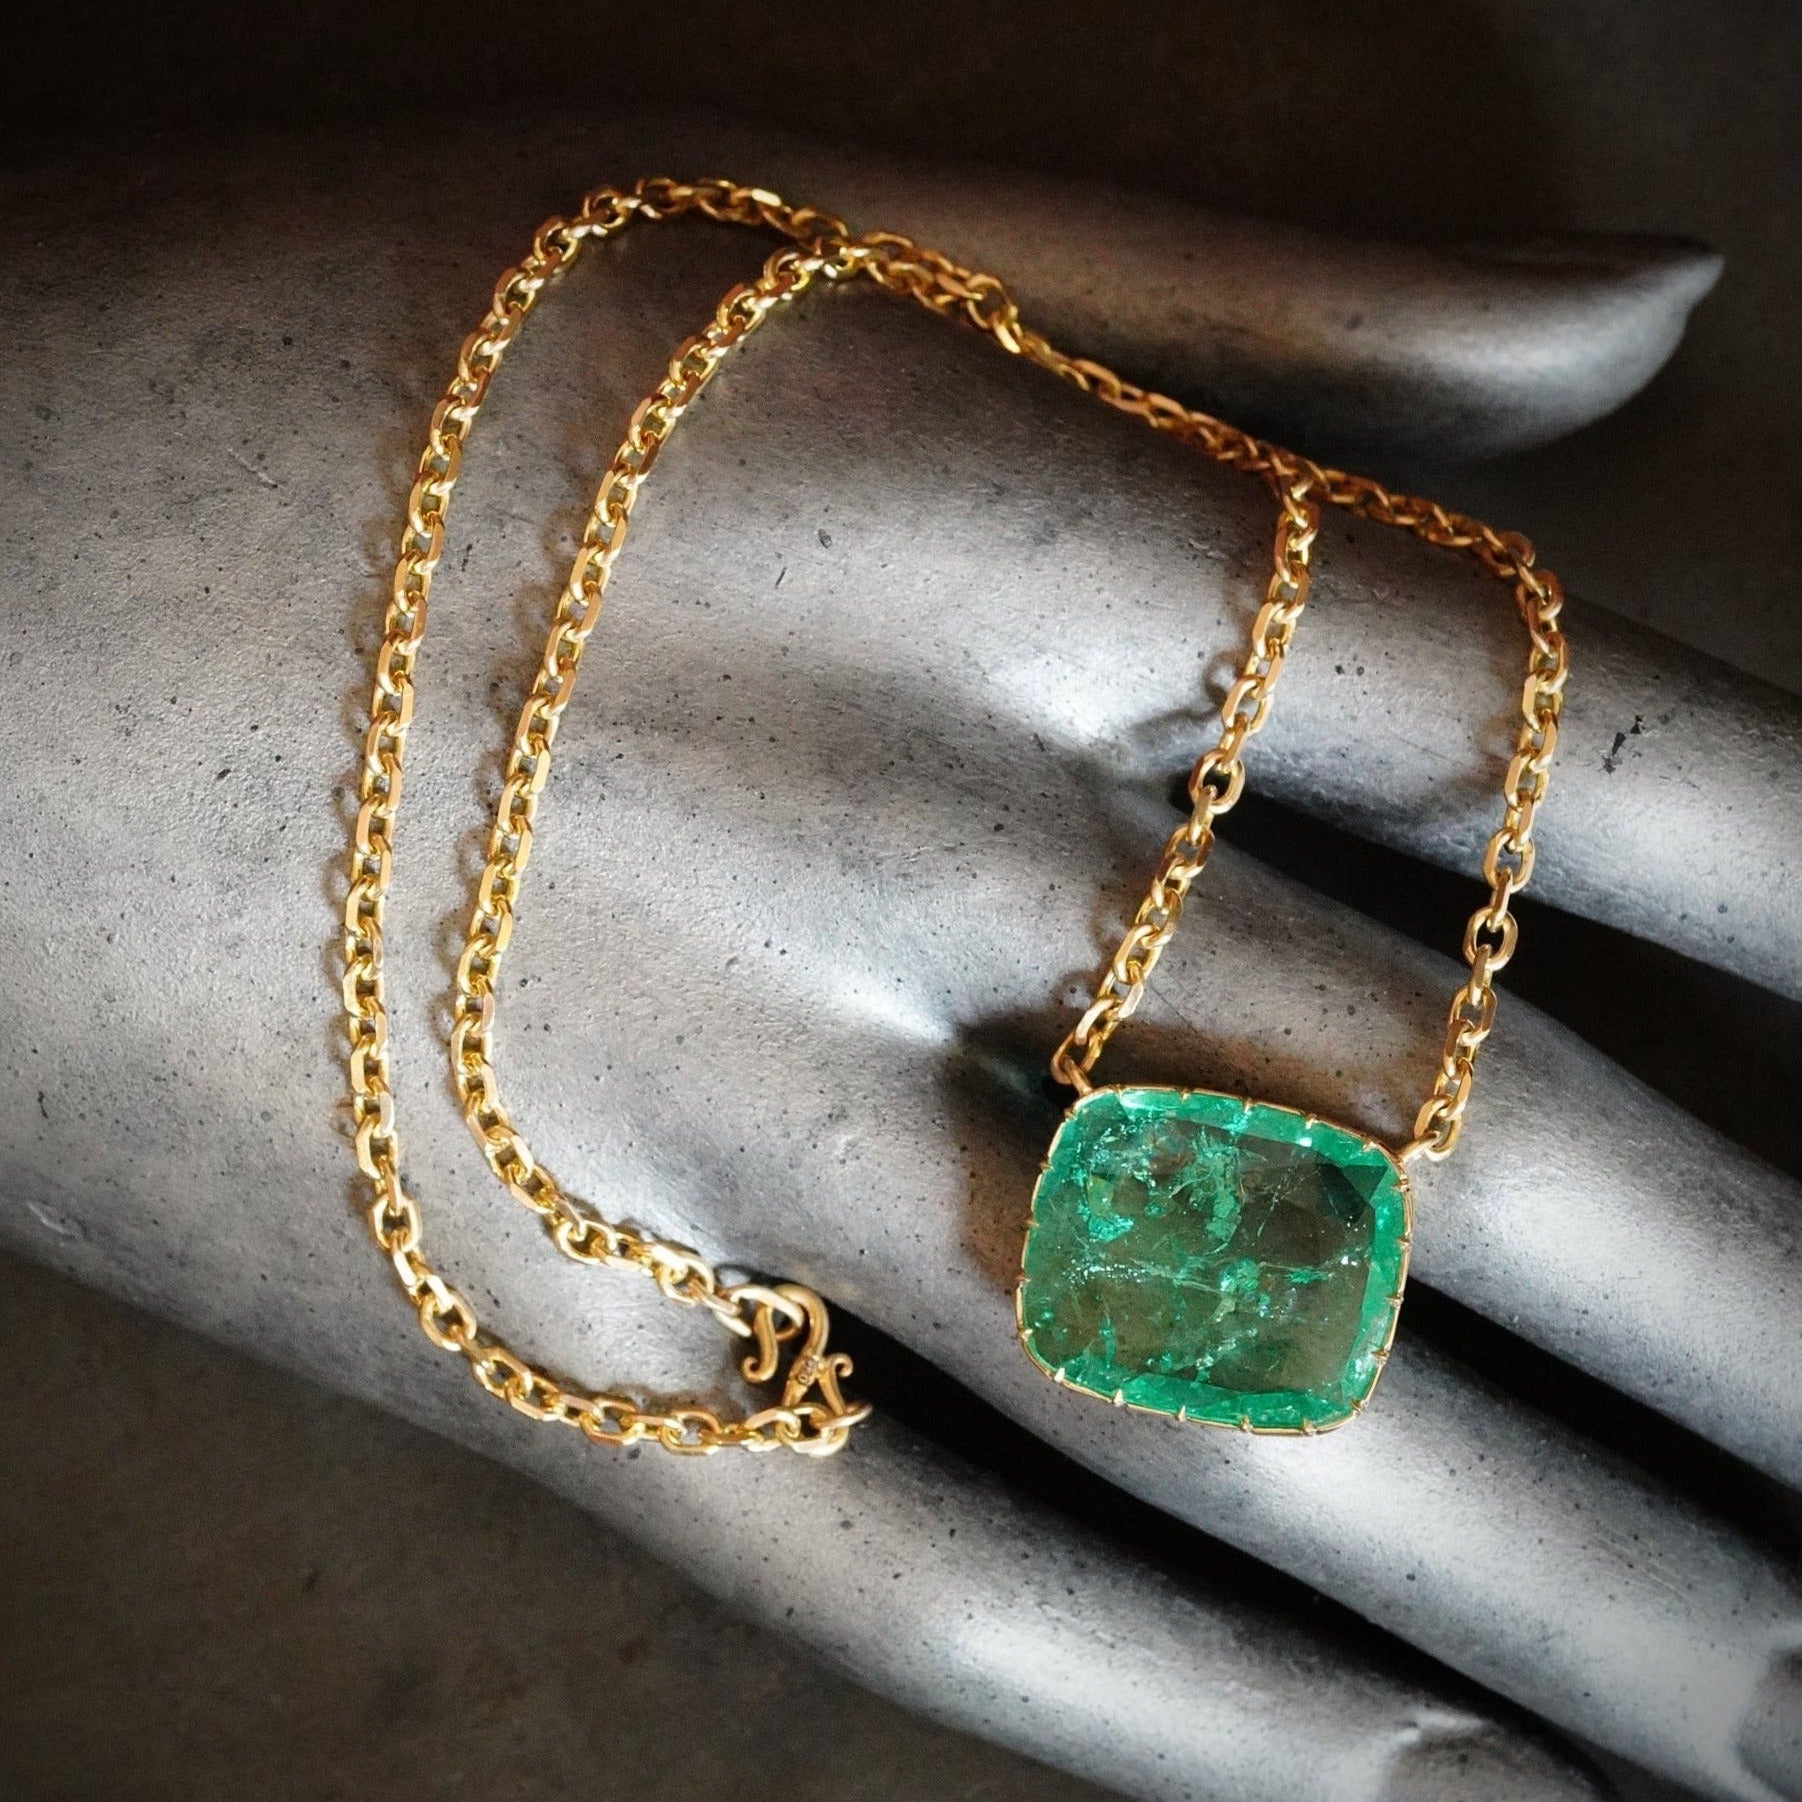 15.34 Carat Colombian Emerald Necklace in 18K Gold